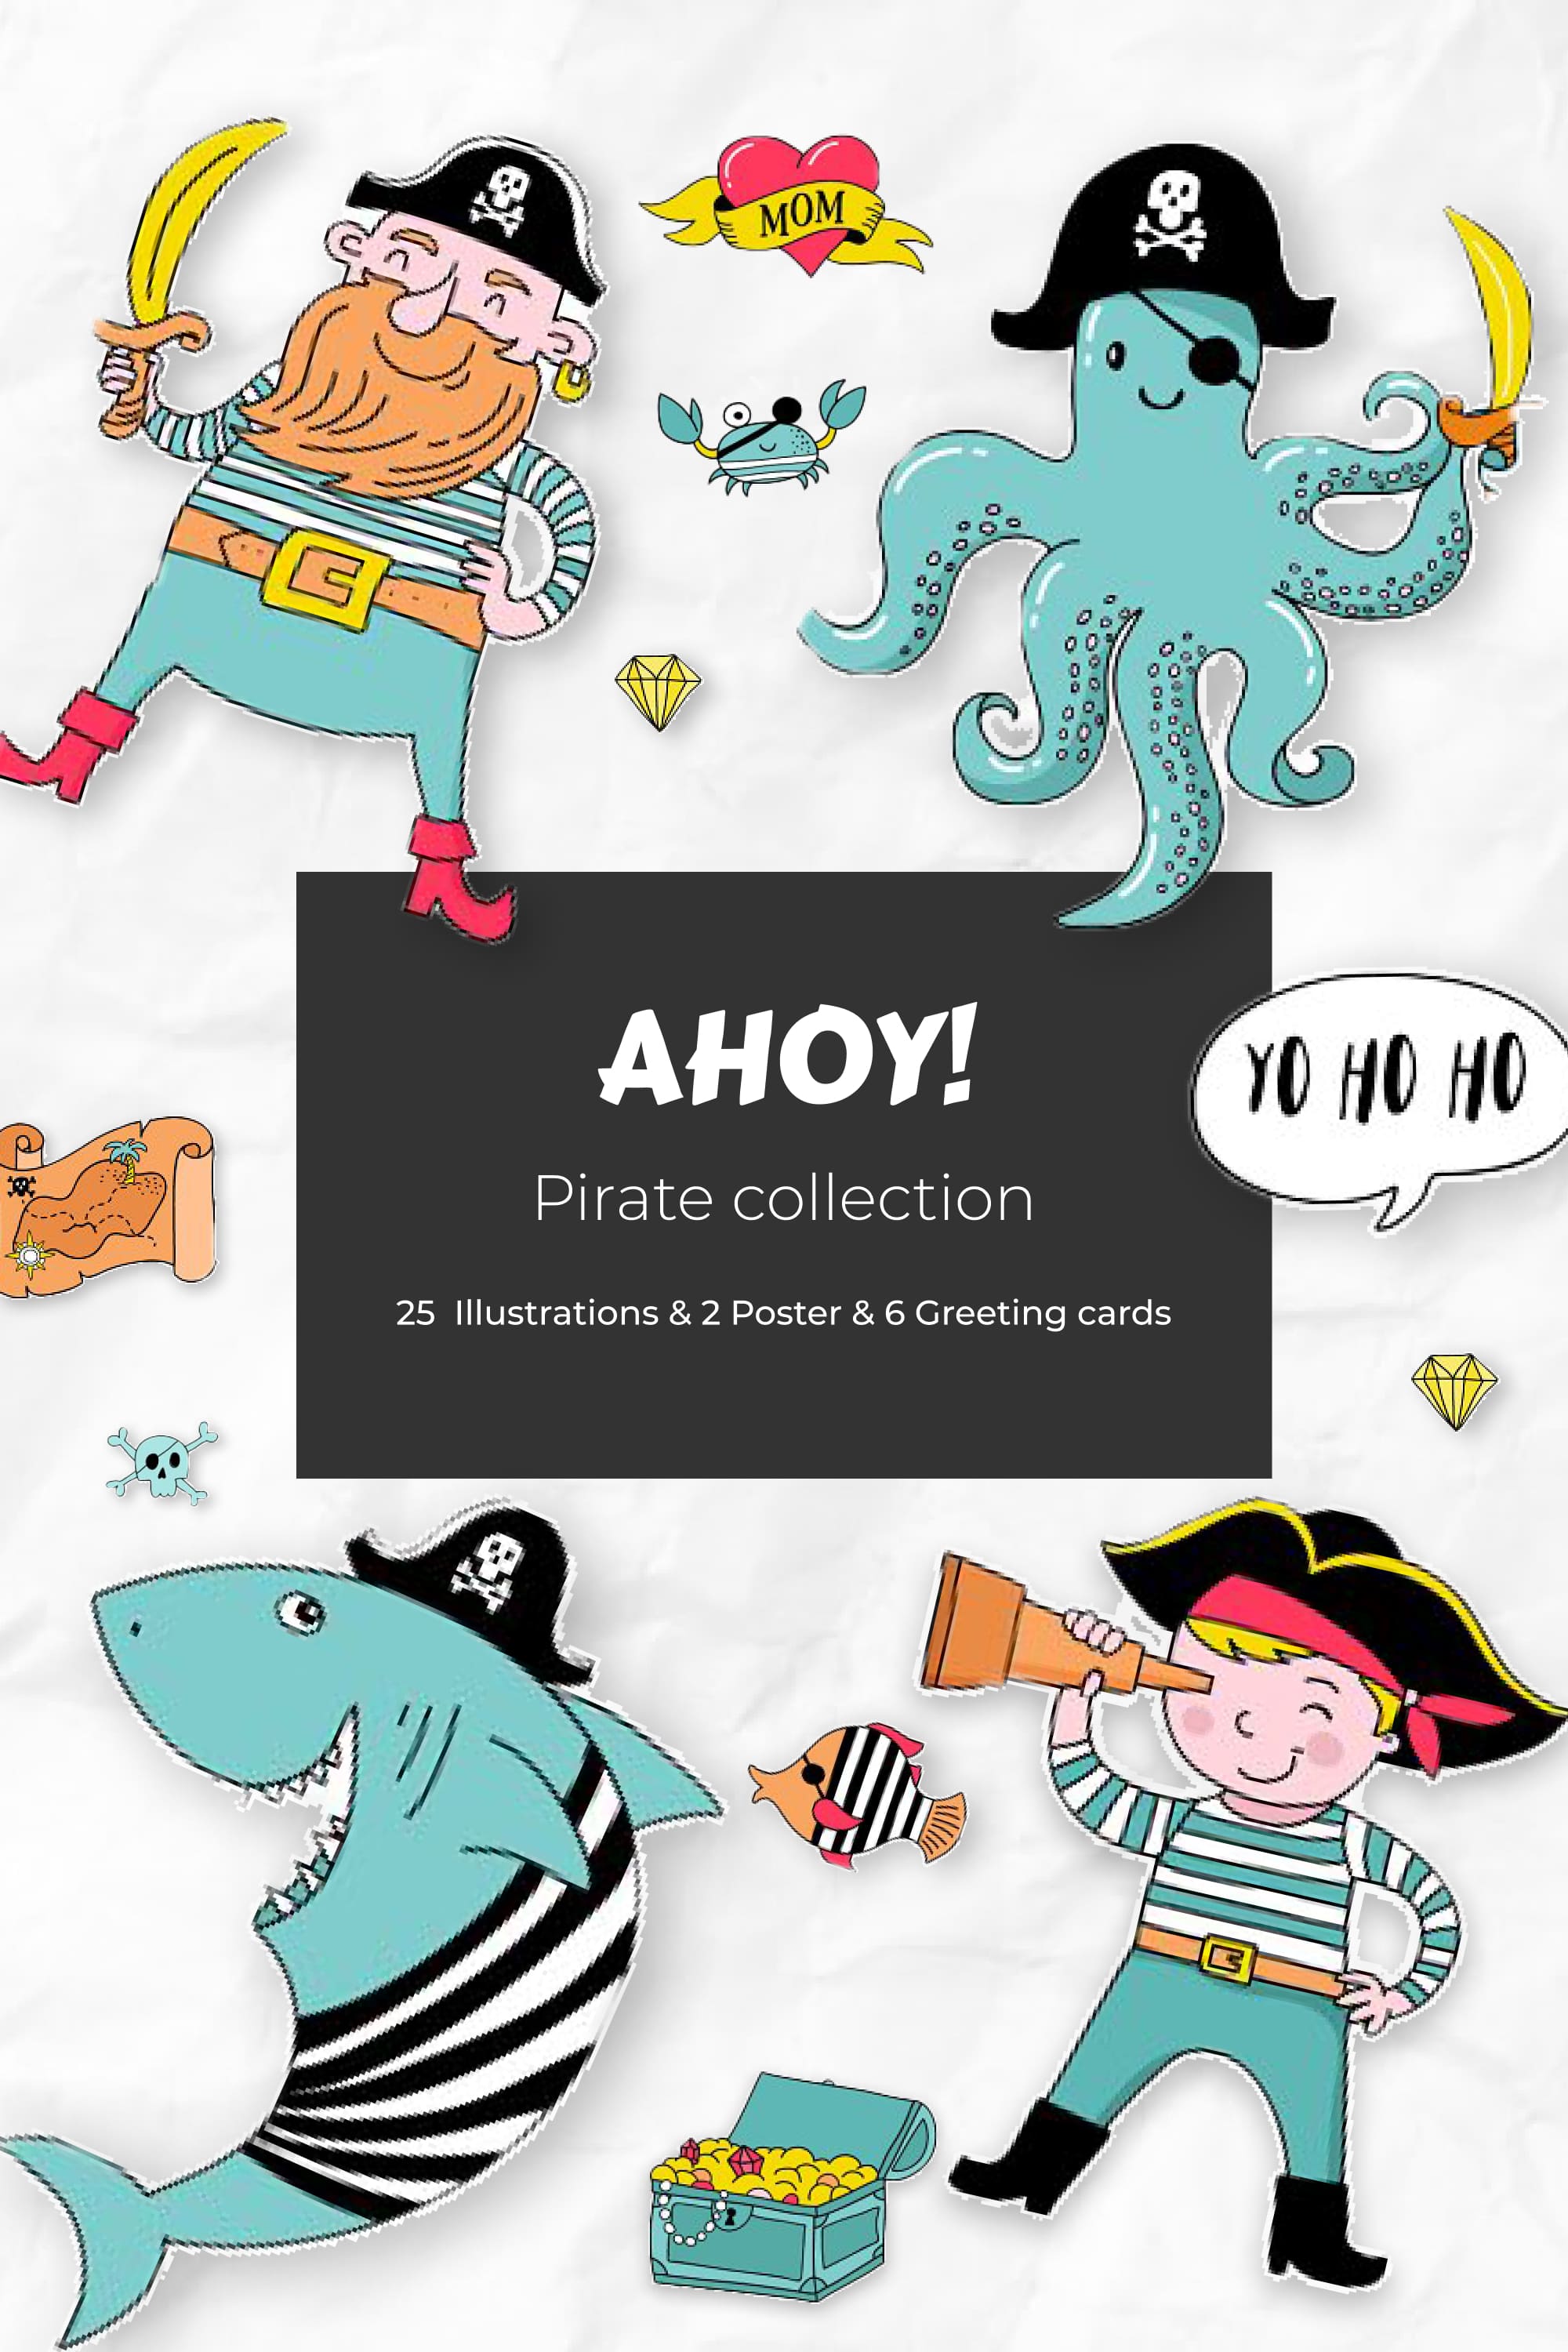 ahoy pirate collection pinterest 620